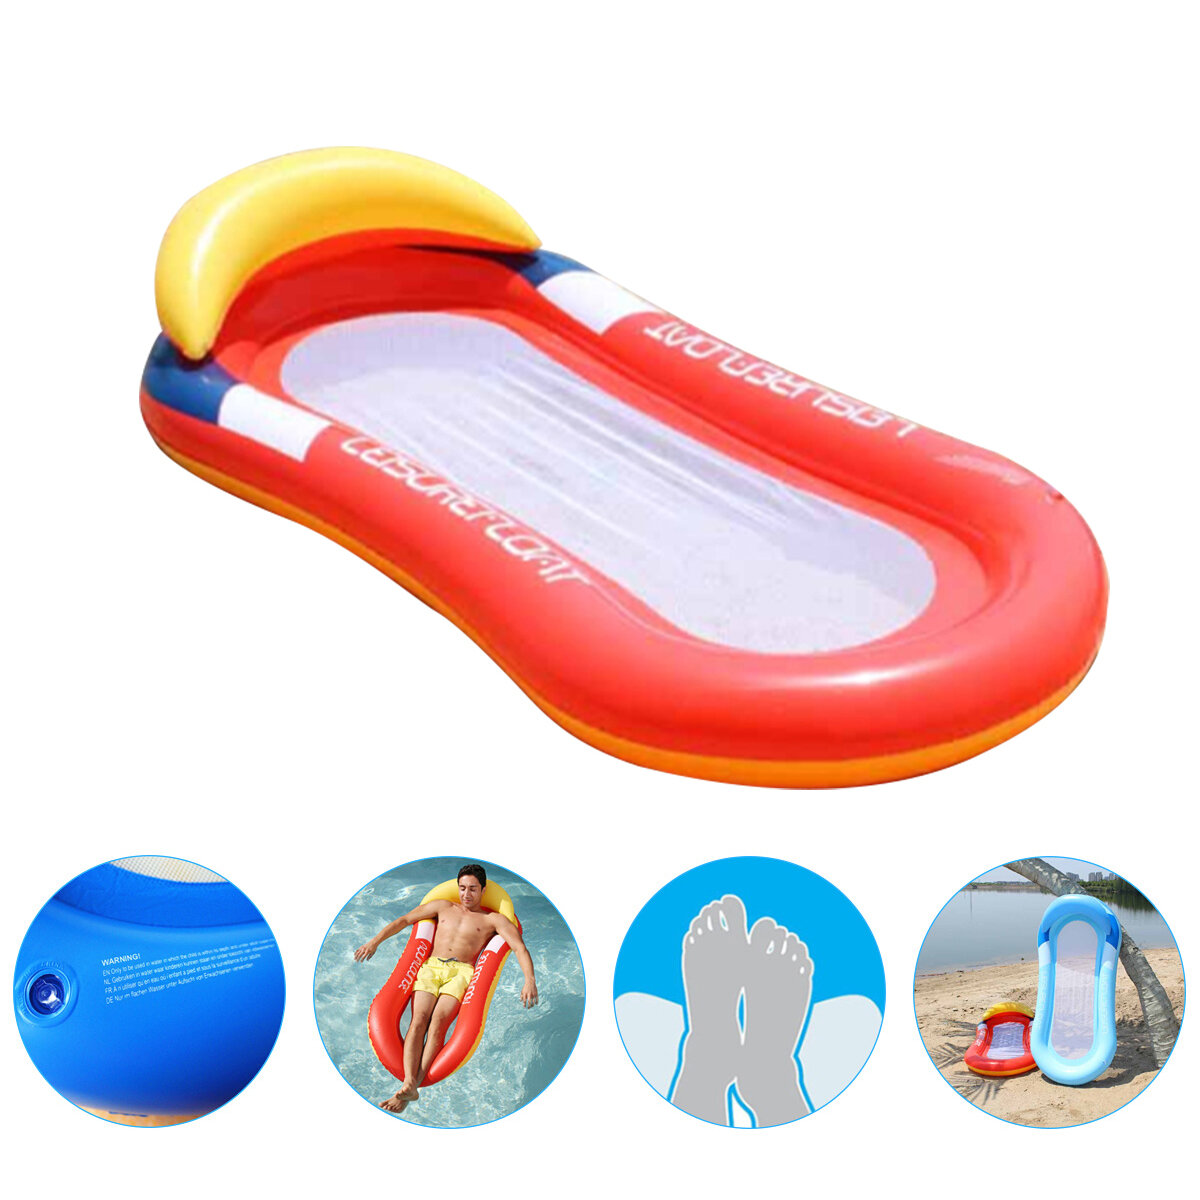 

153x65CM Swimming Pool Air Mattress Summer Inflatable Floating Row Beach Sleeping Bed Chair Lounge Float Hammock